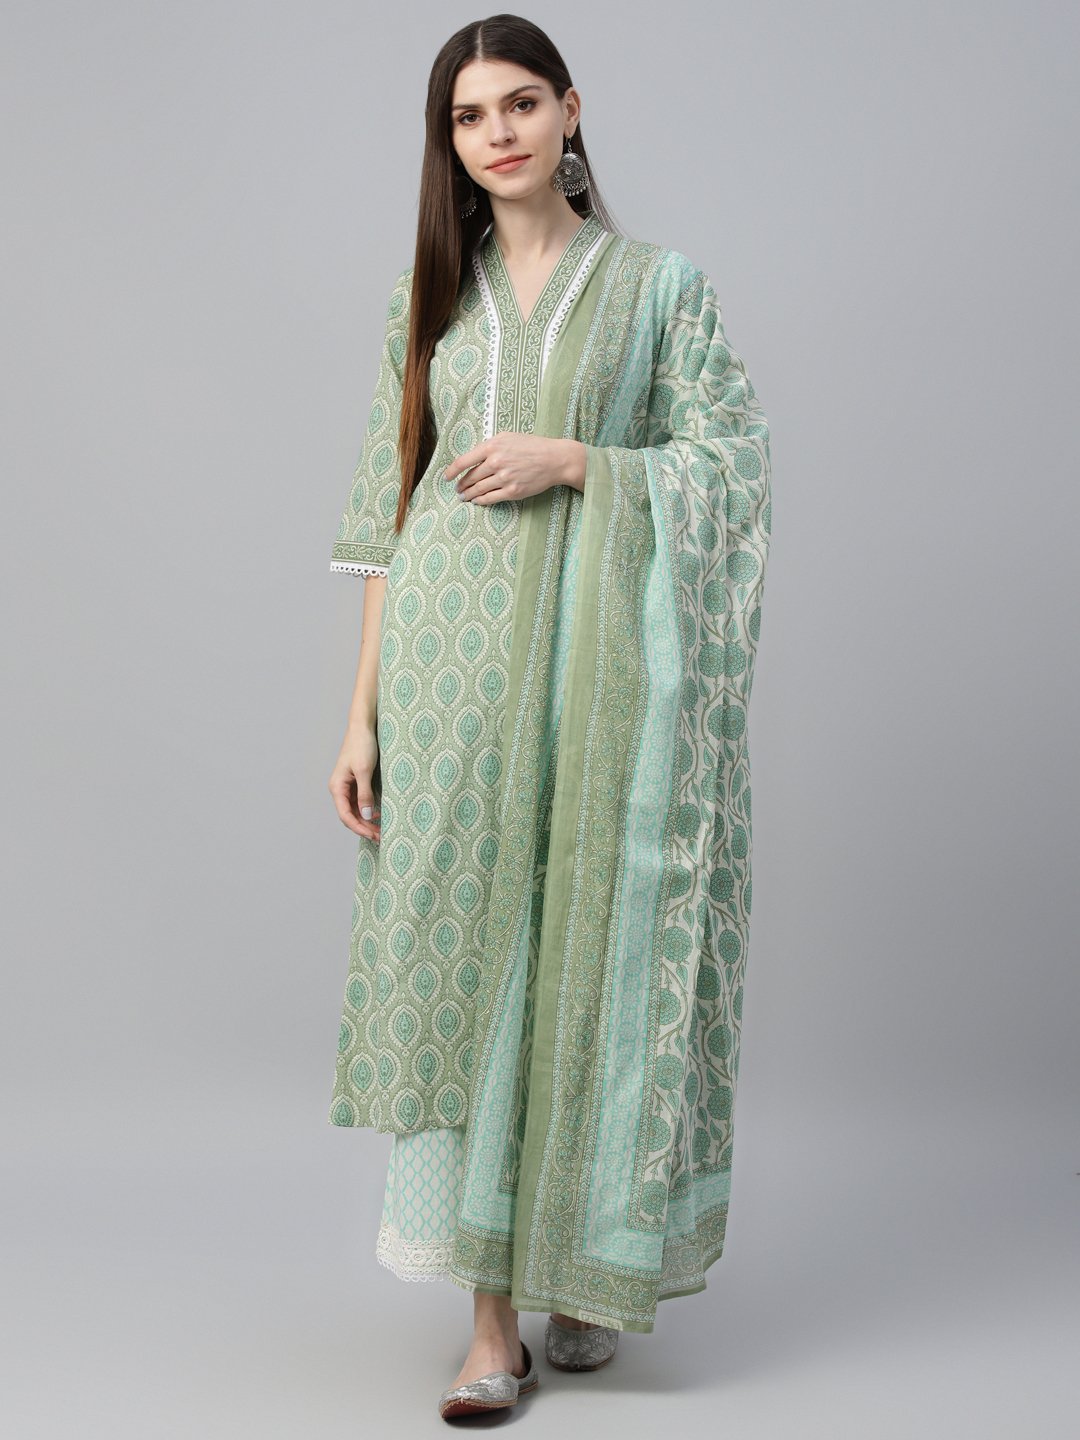 Suit Sets | Ethnic Suit Sets for Women Online in India | Gerua